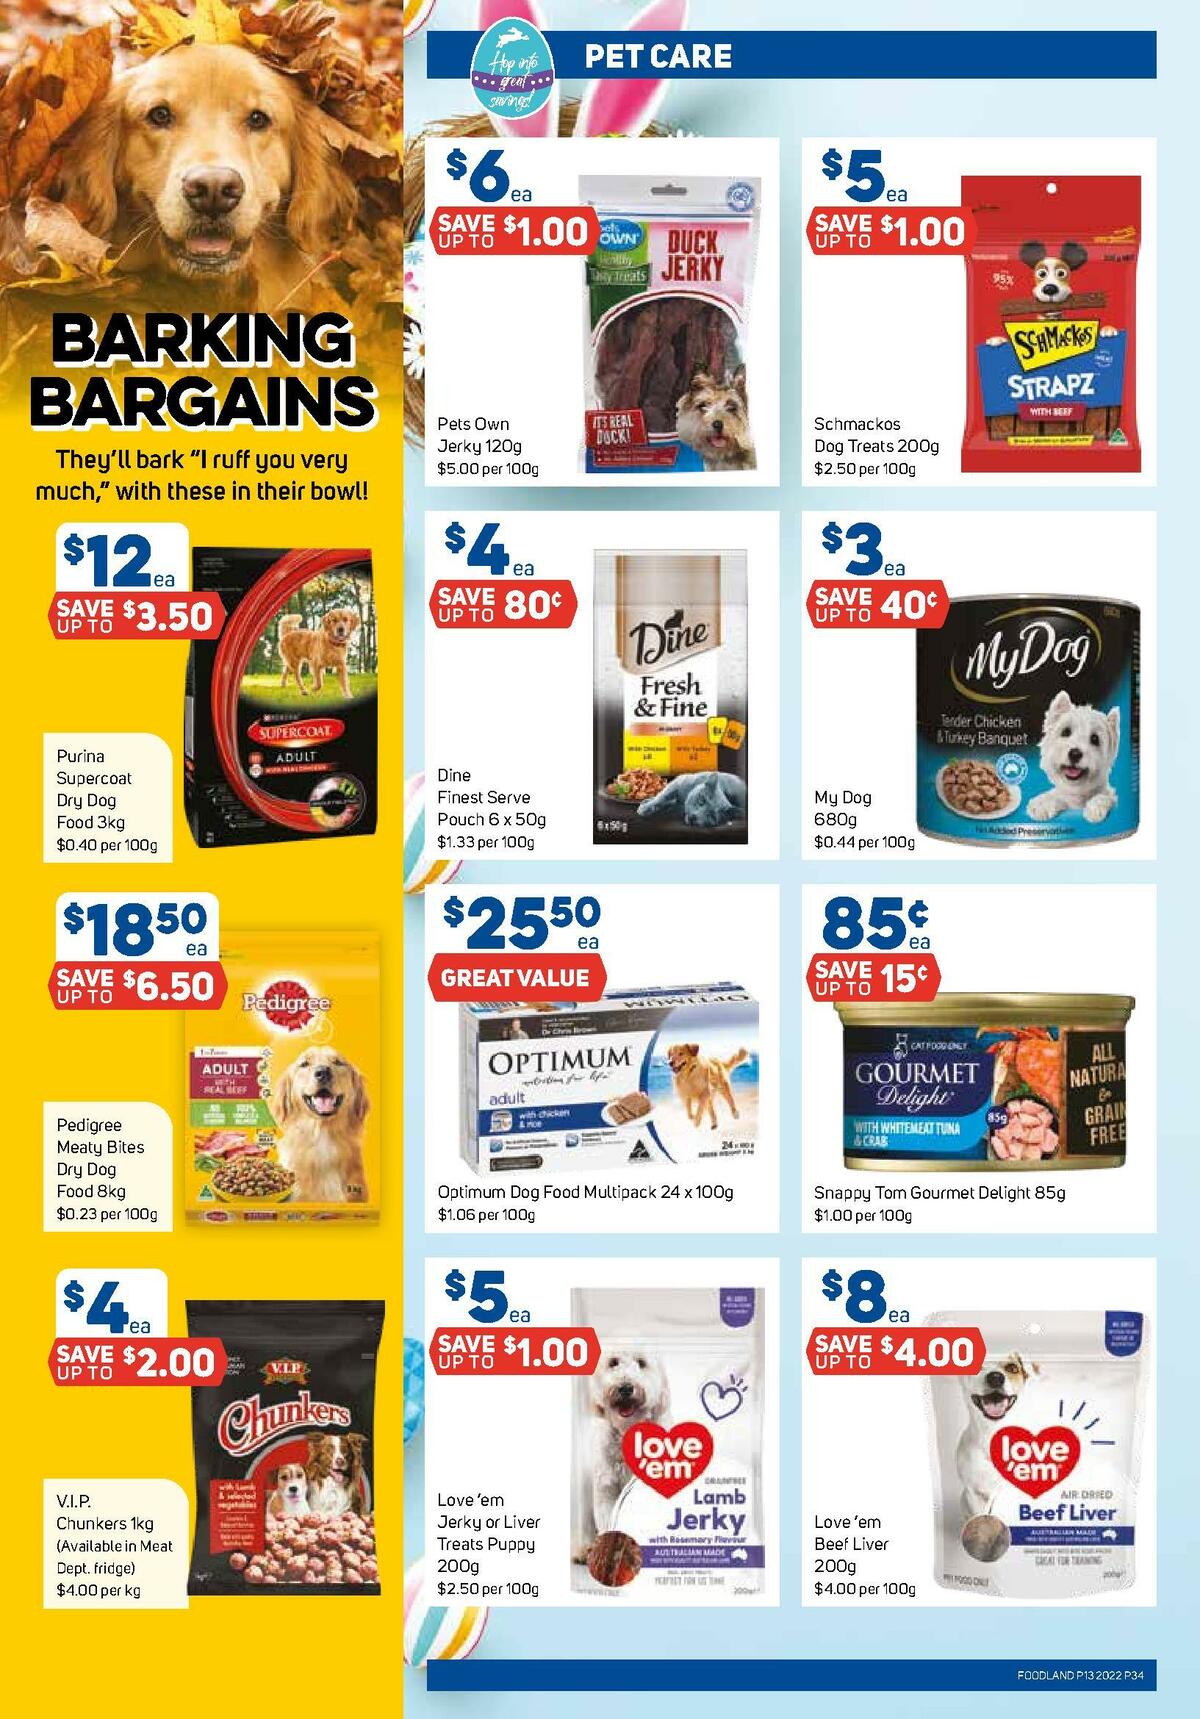 Foodland Catalogues from 30 March